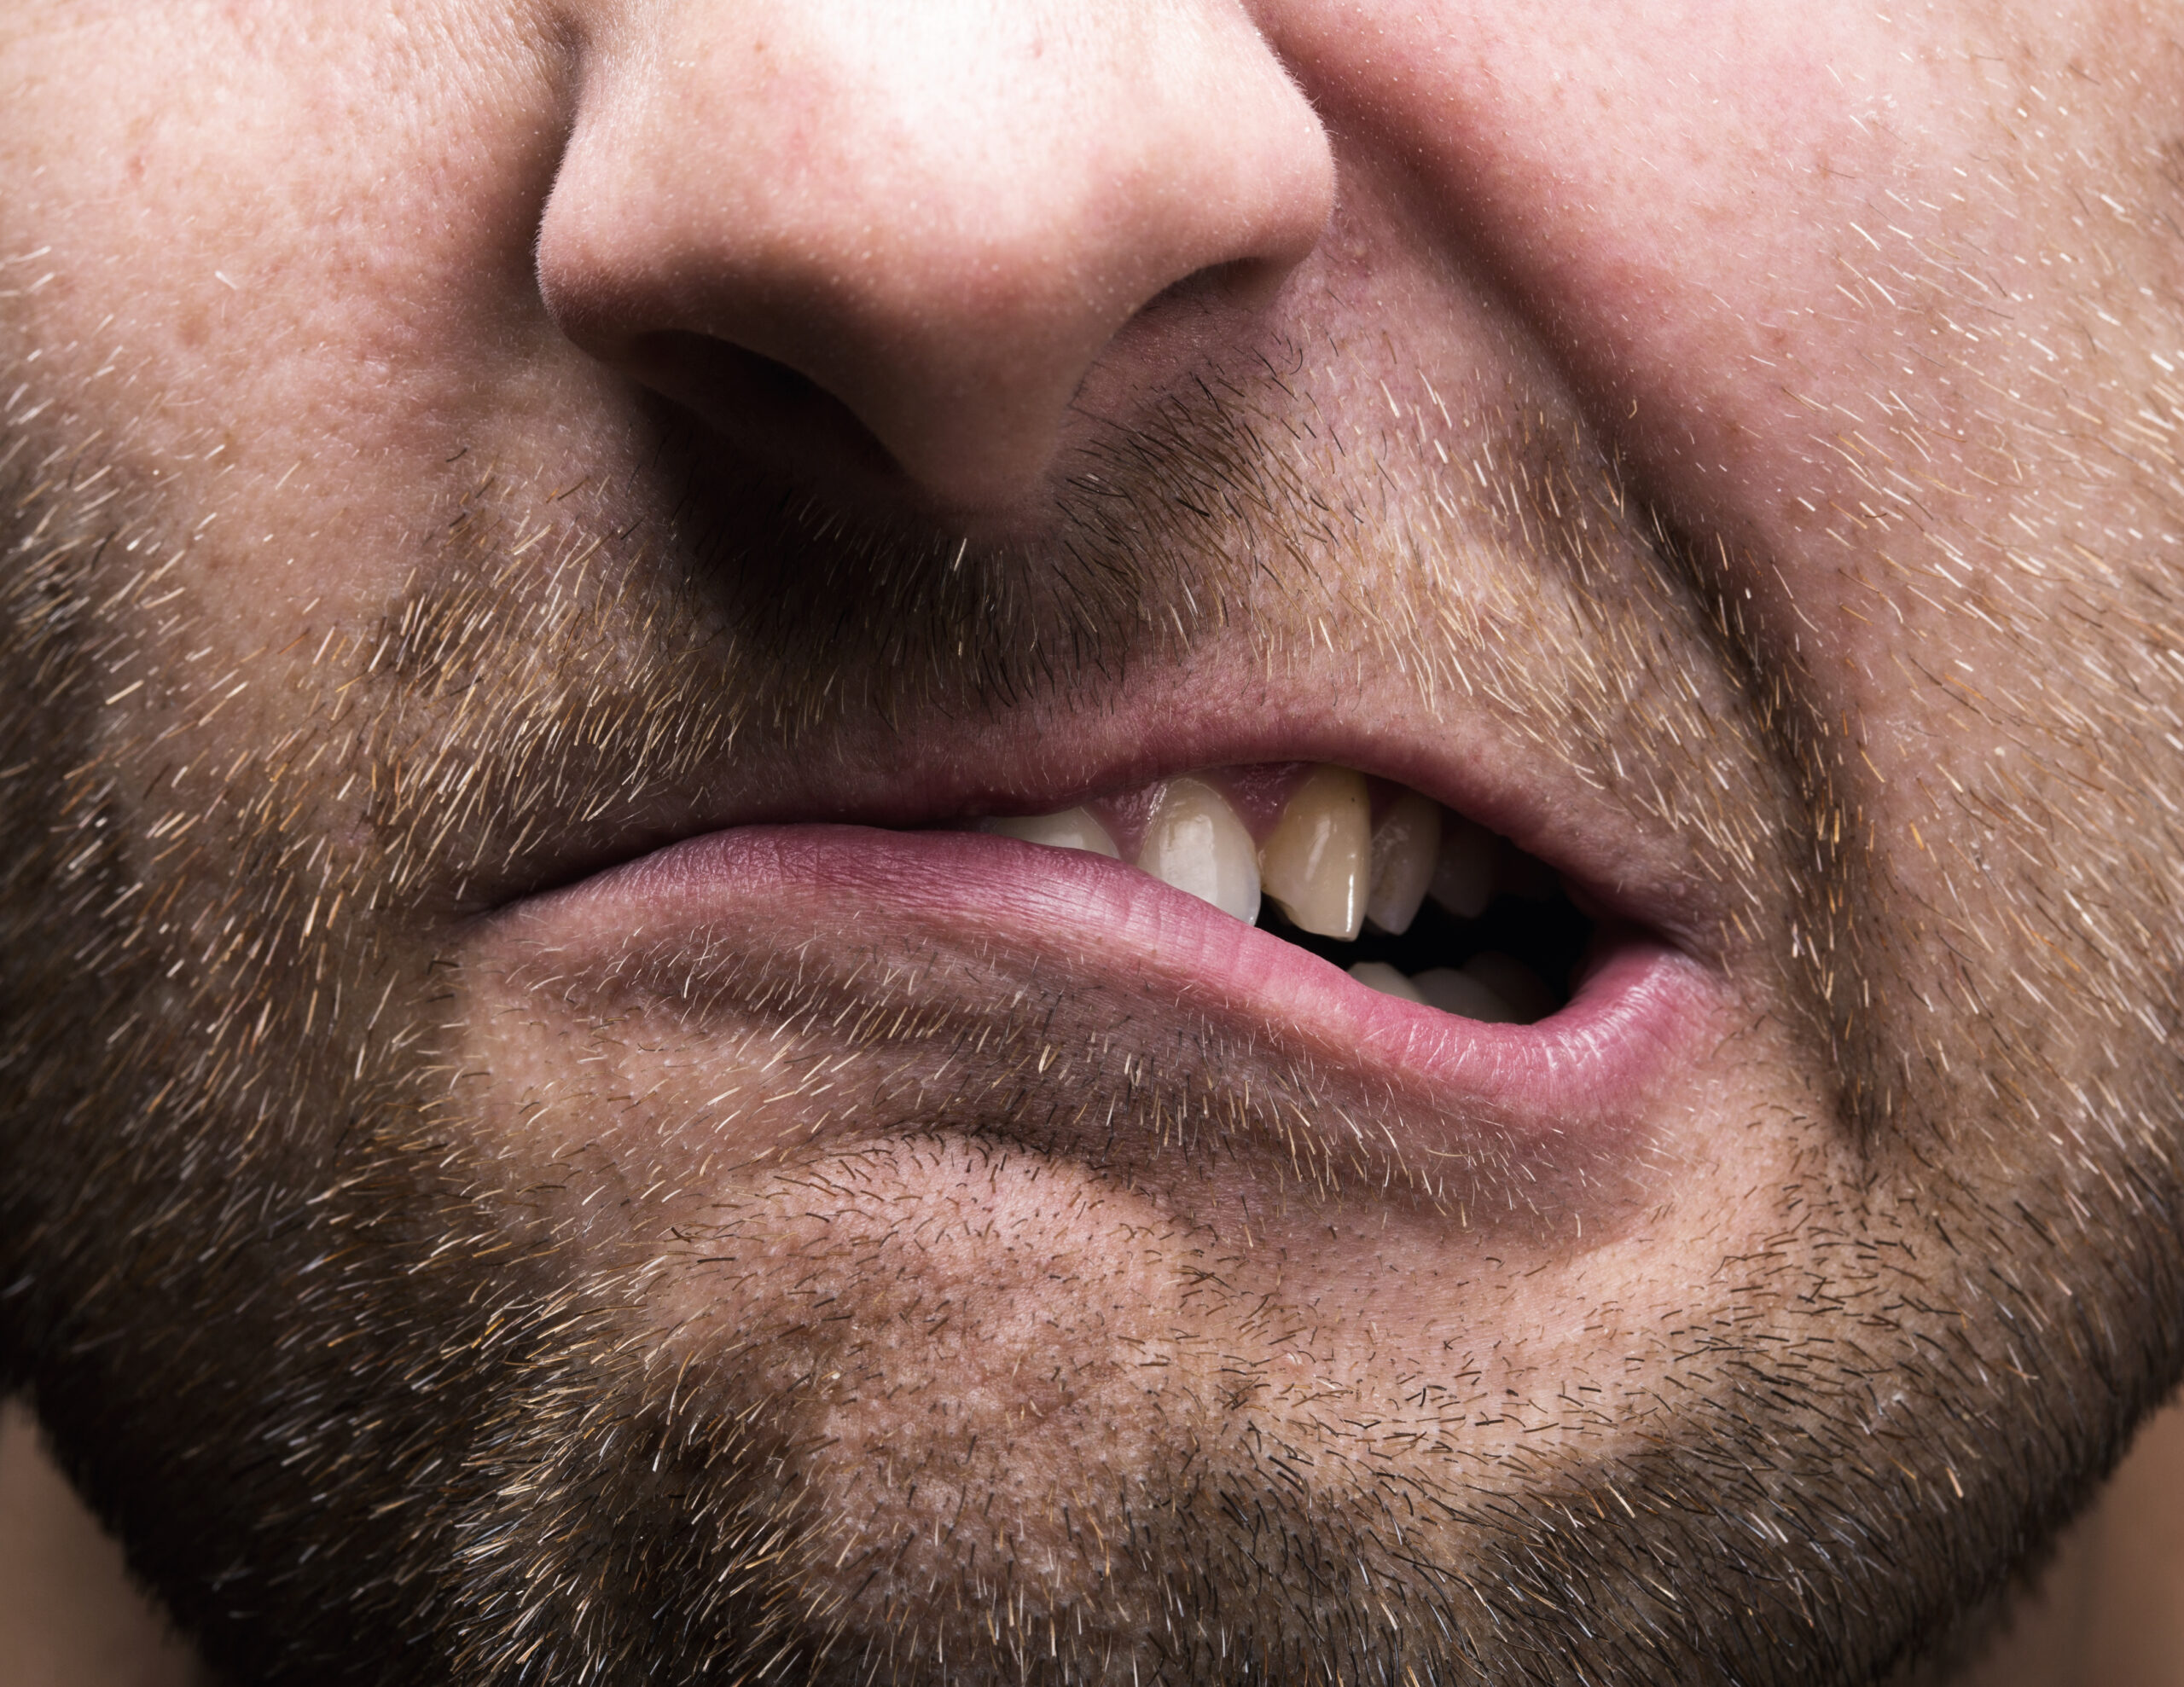 Closeup of mouth of very stressed man